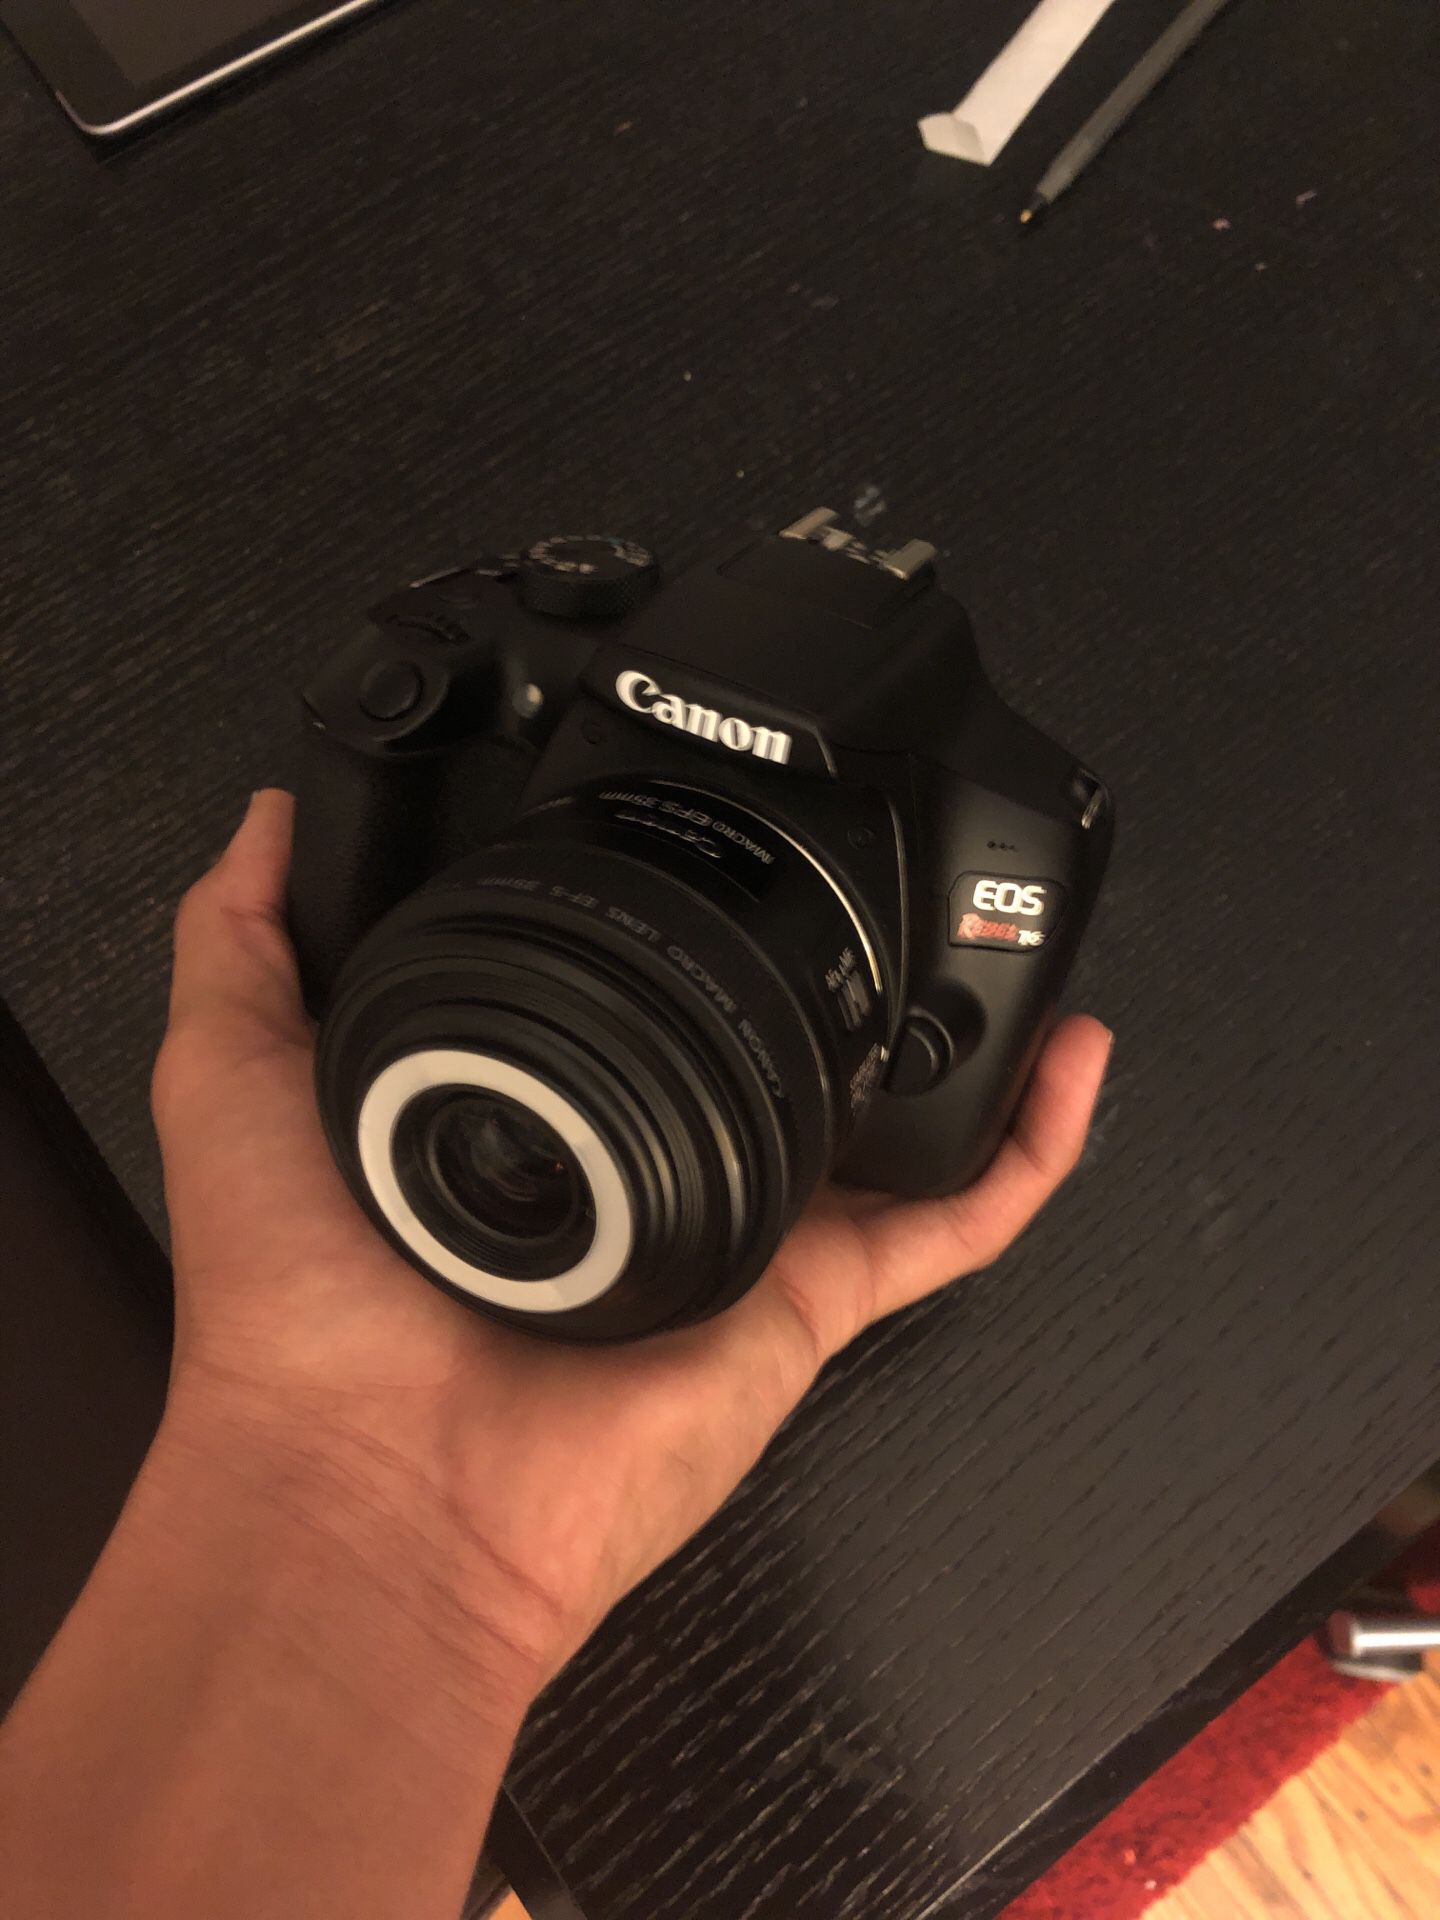 Canon T6, 35mm lens w/ built-in light, 75-300mm lens, Charger, 64gb SD Card